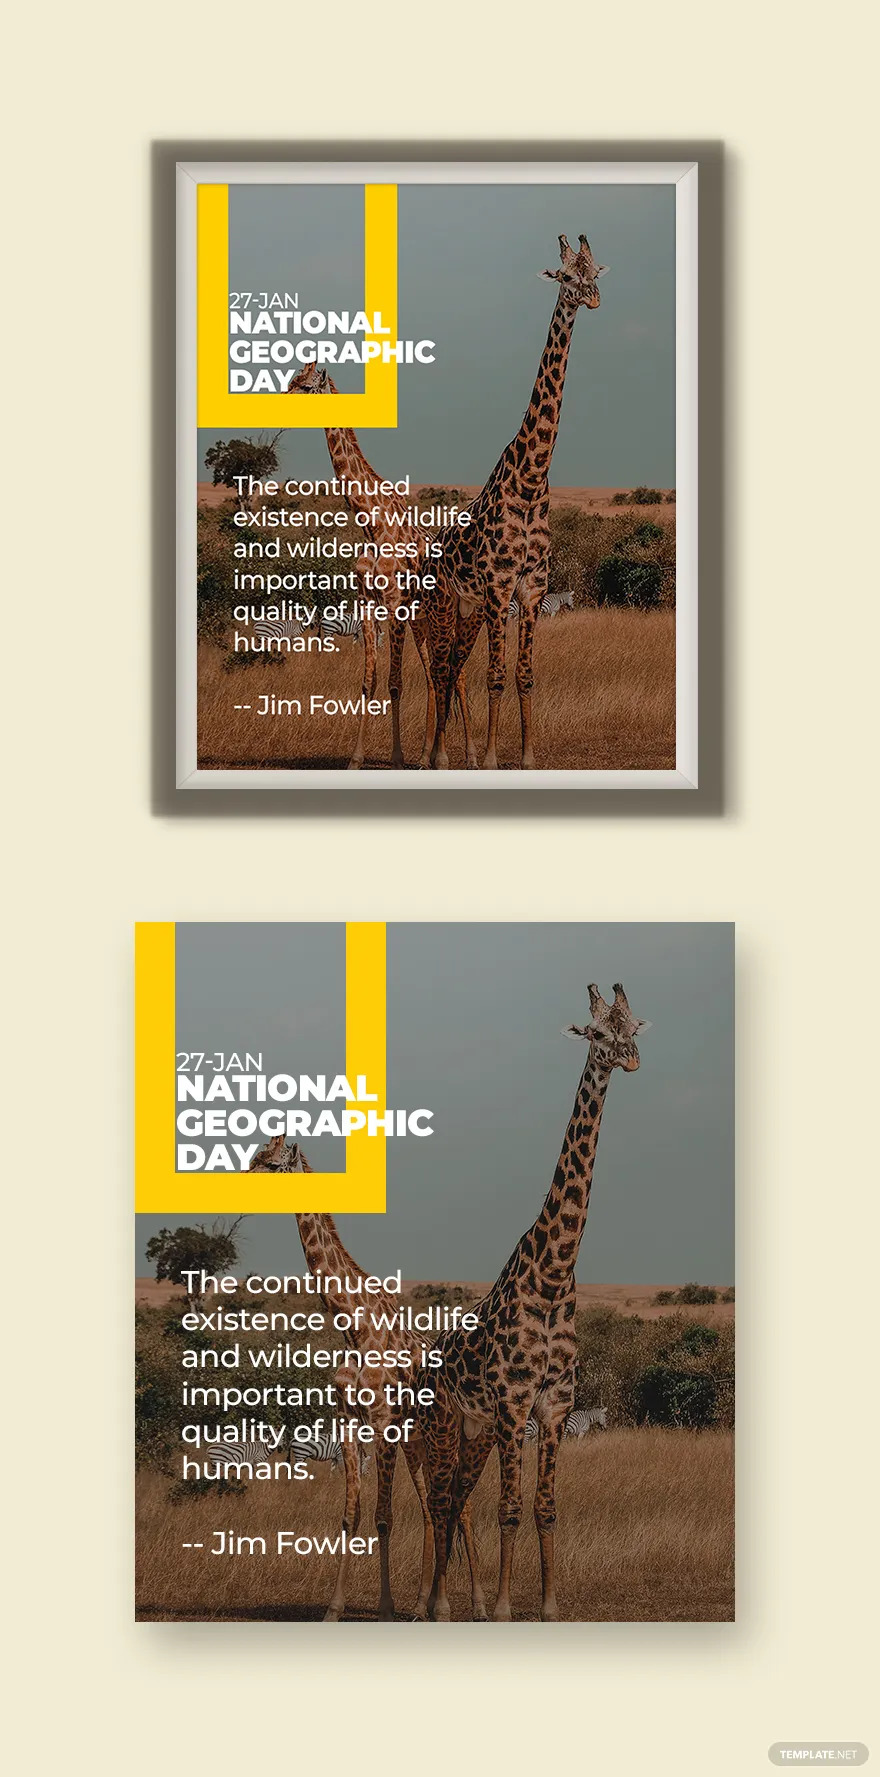 national geographic day quote images ideas and examples